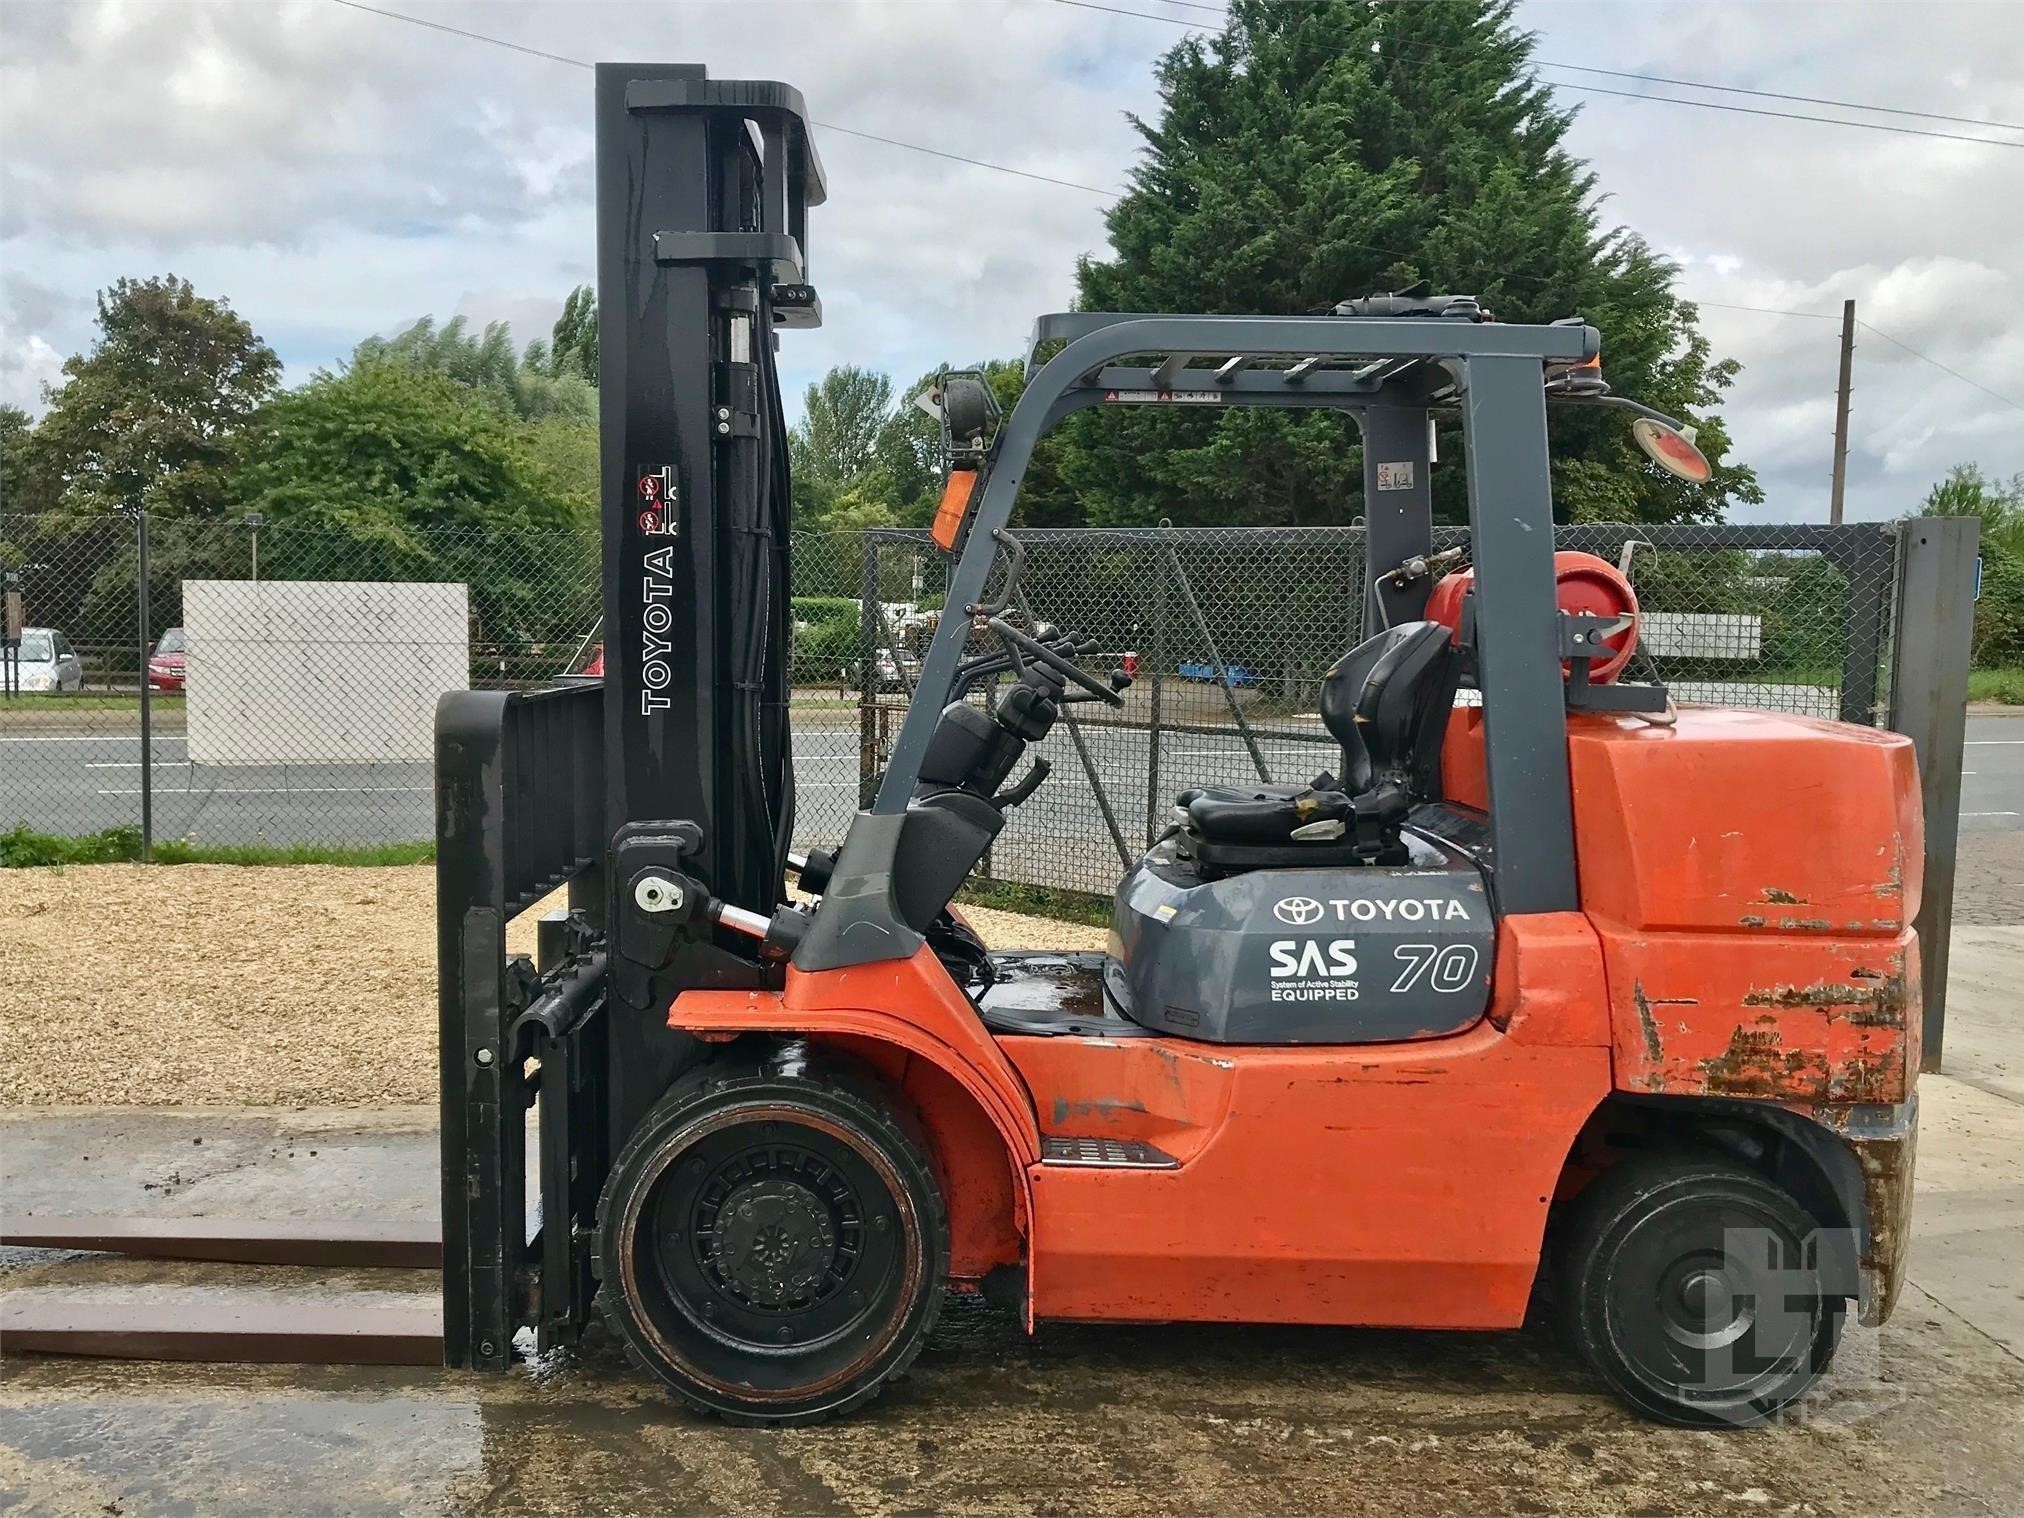 Forklifts For Sale 14828 Listings Liftstoday United Kingdom